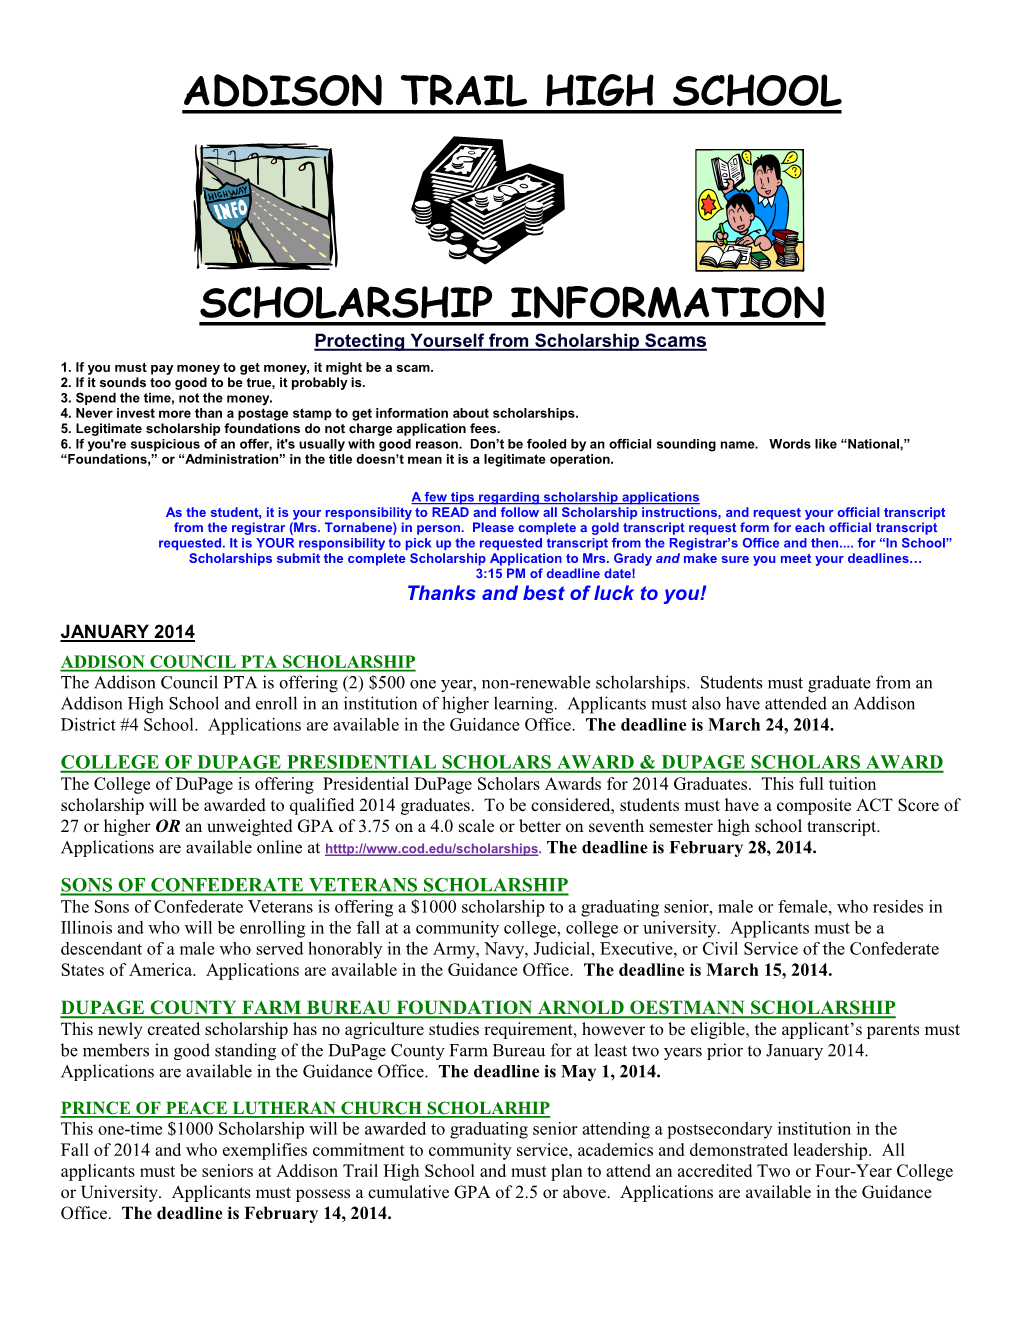 SCHOLARSHIP INFORMATION Protecting Yourself from Scholarship Scams 1